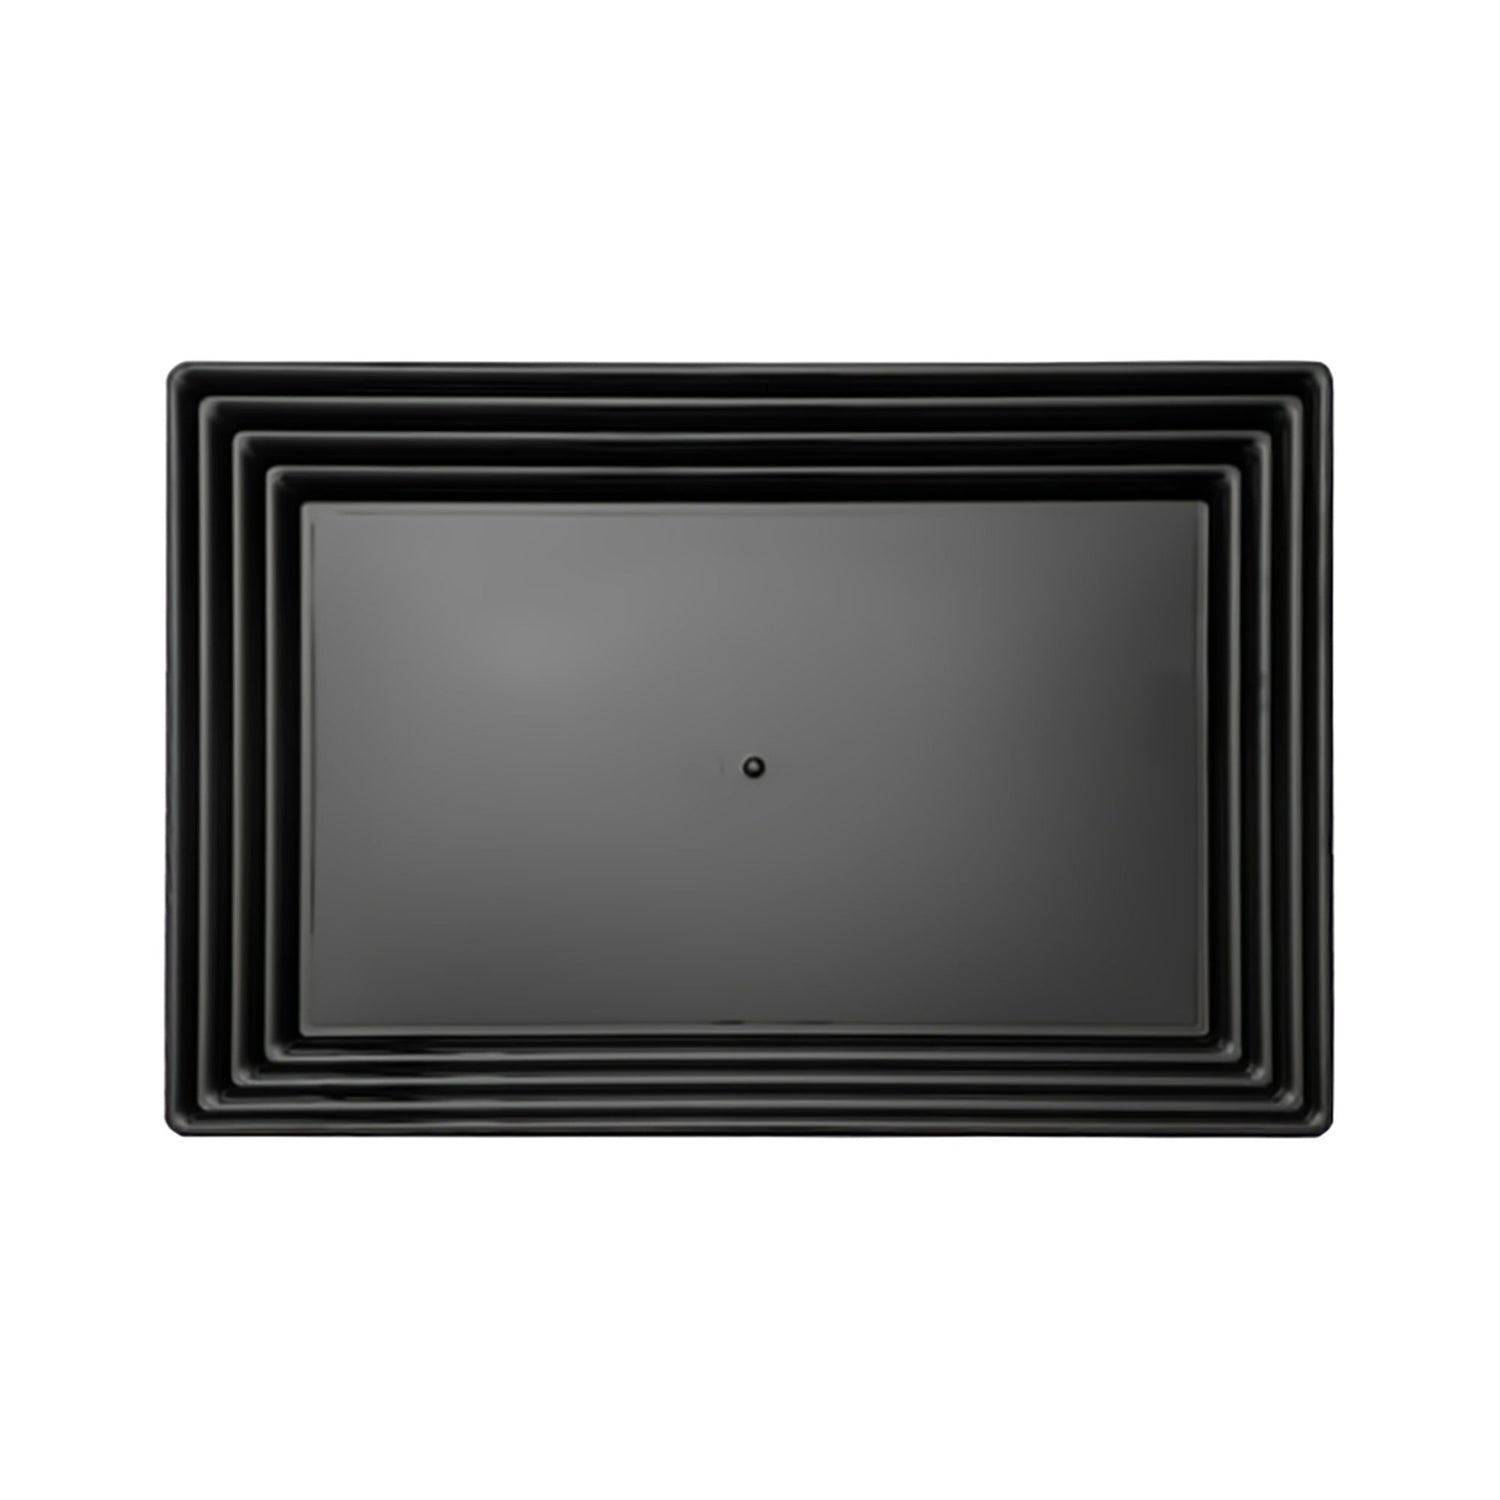 Black Rectangular with Groove Rim Plastic Serving Trays | The Kaya Collection